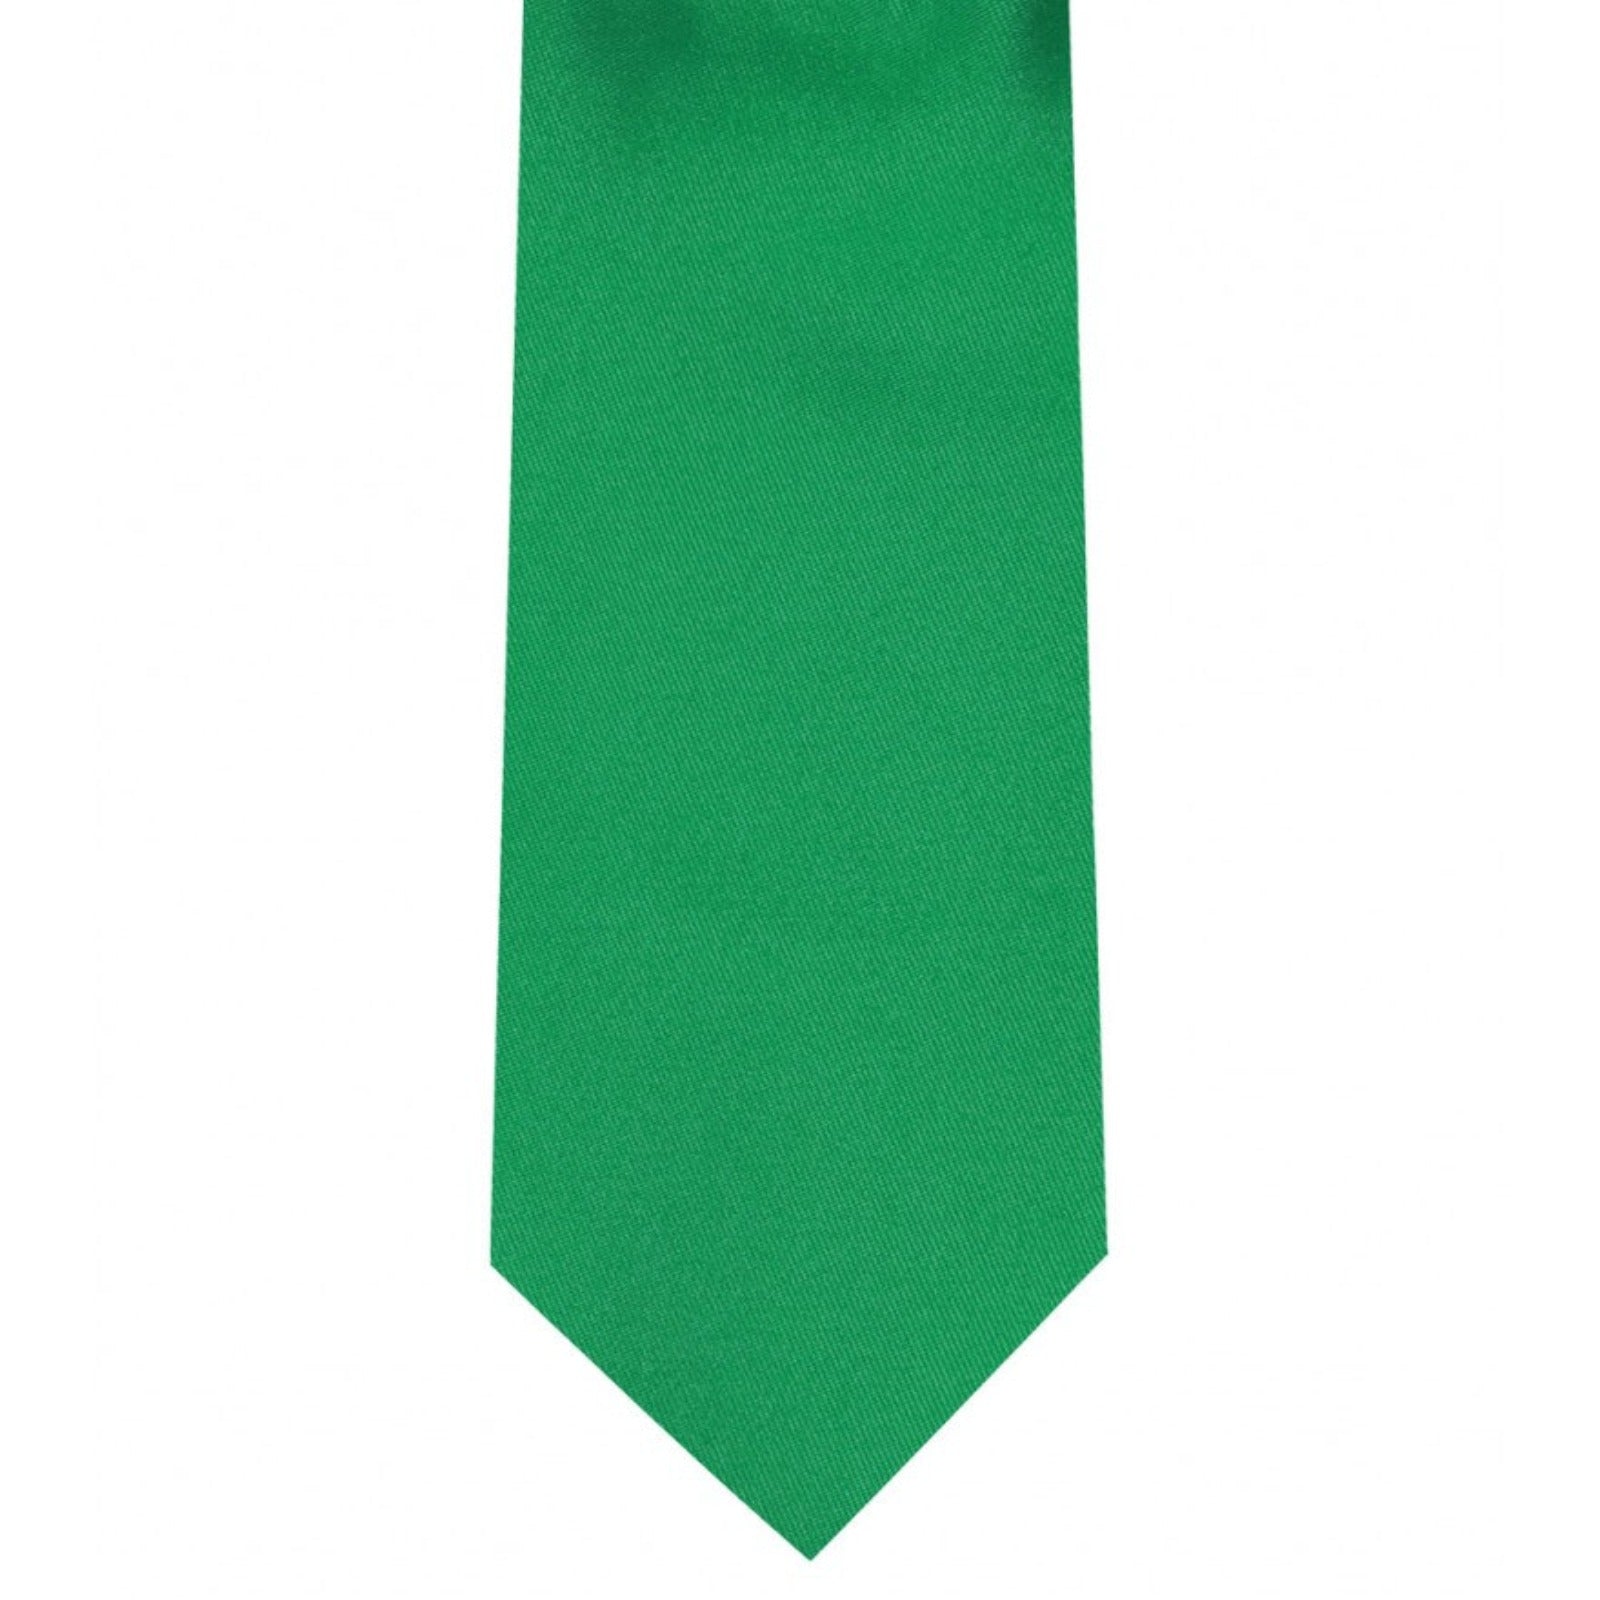 Classic Emerald Green Tie Ultra Skinny tie width 2.25 inches With Matching Pocket Square | KCT Menswear